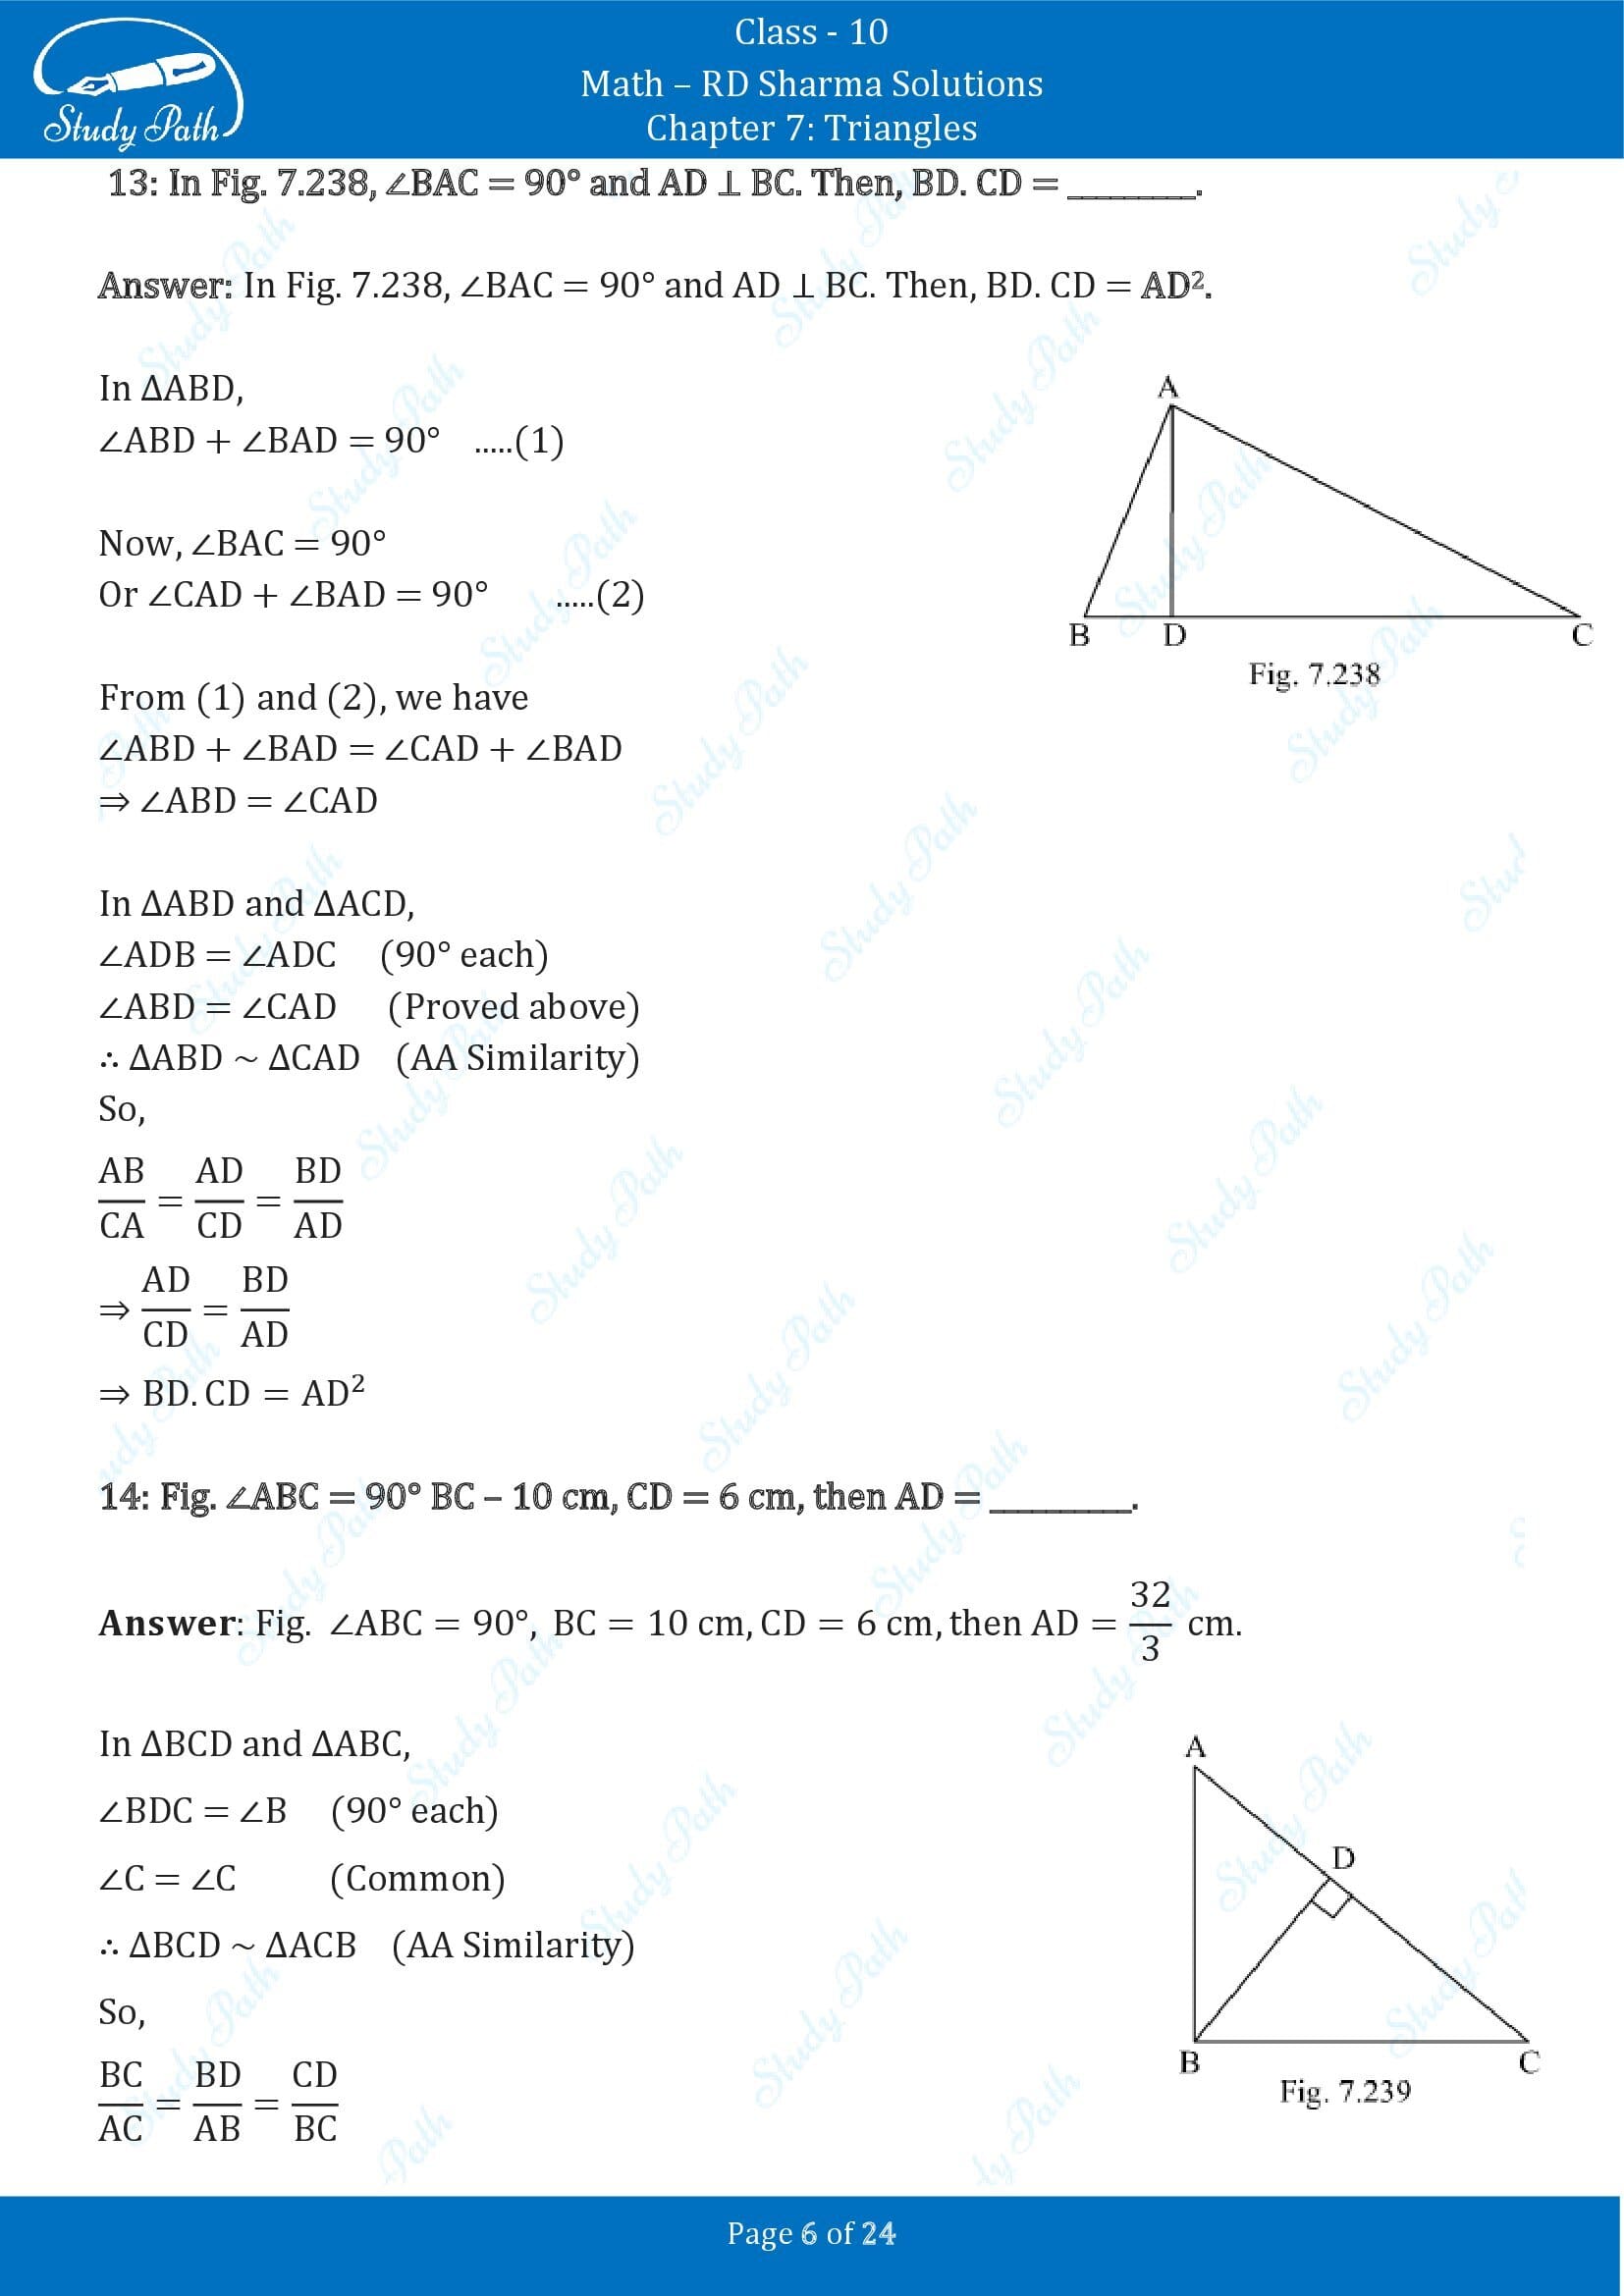 RD Sharma Solutions Class 10 Chapter 7 Triangles Fill in the Blank Type Questions FBQs 00006